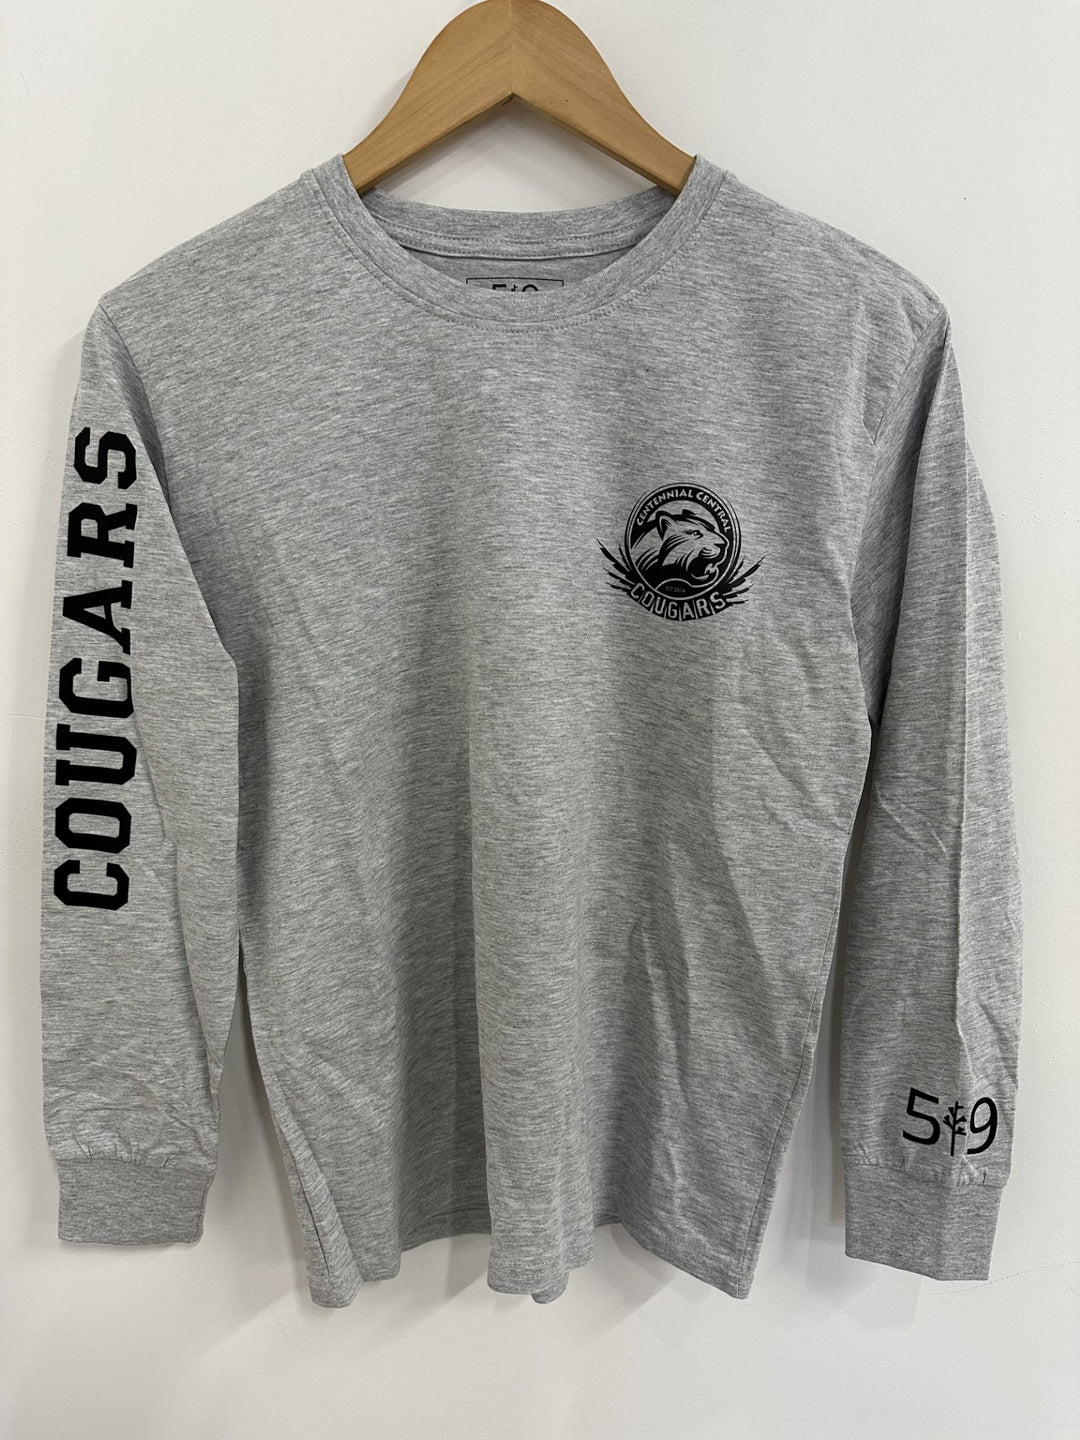 CENTENNIAL CENTRAL LONG SLEEVE (YOUTH LARGE)